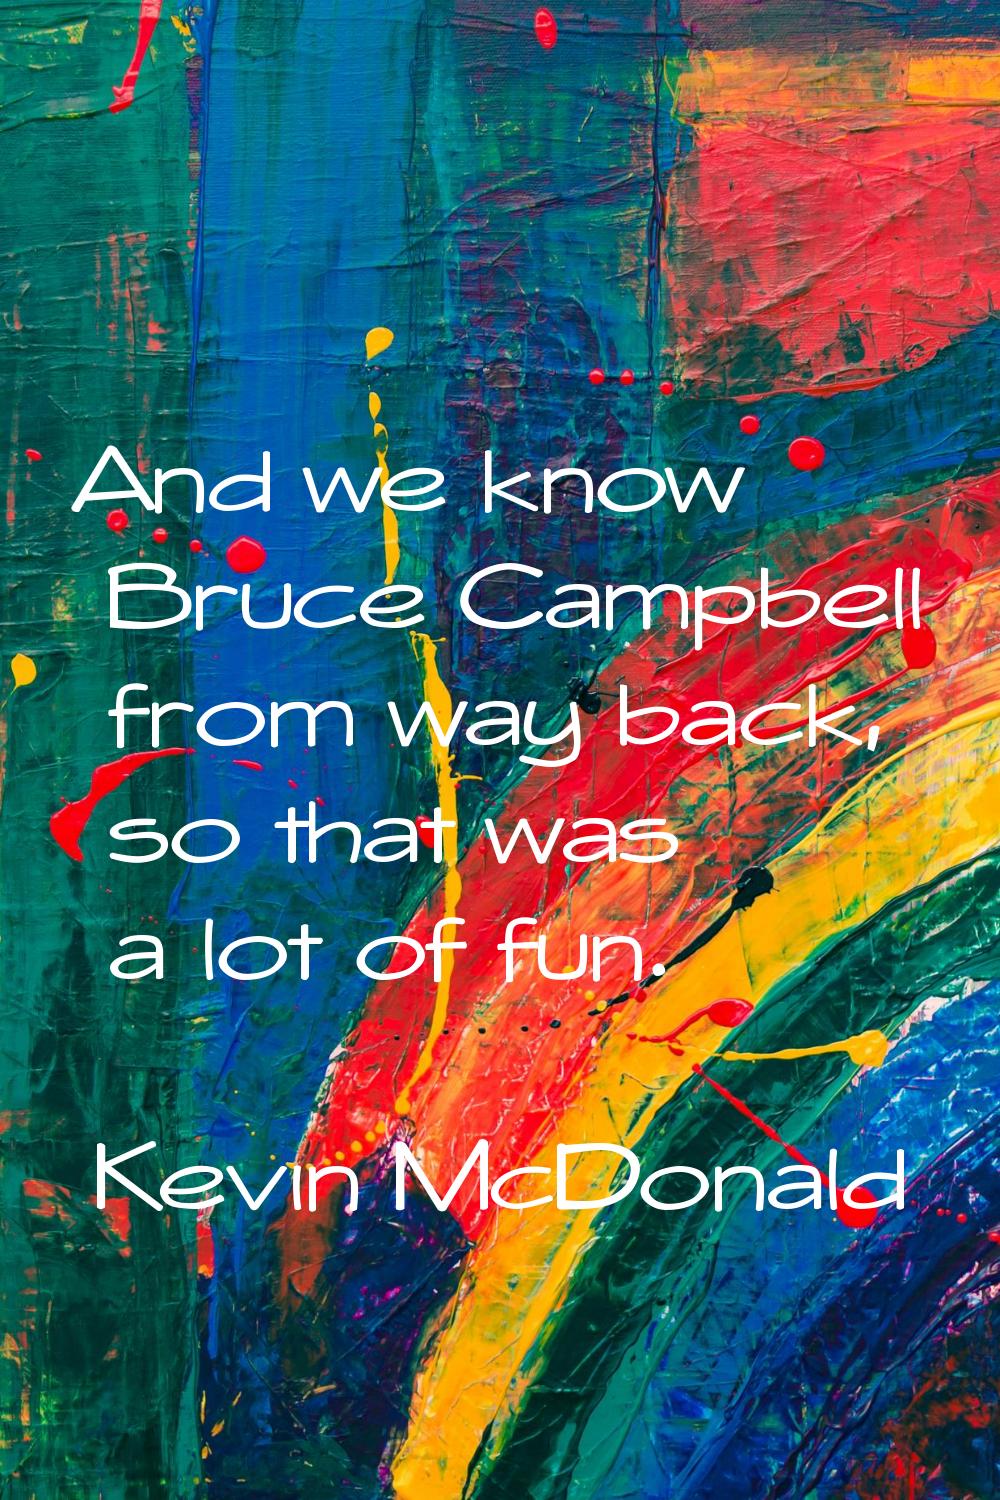 And we know Bruce Campbell from way back, so that was a lot of fun.